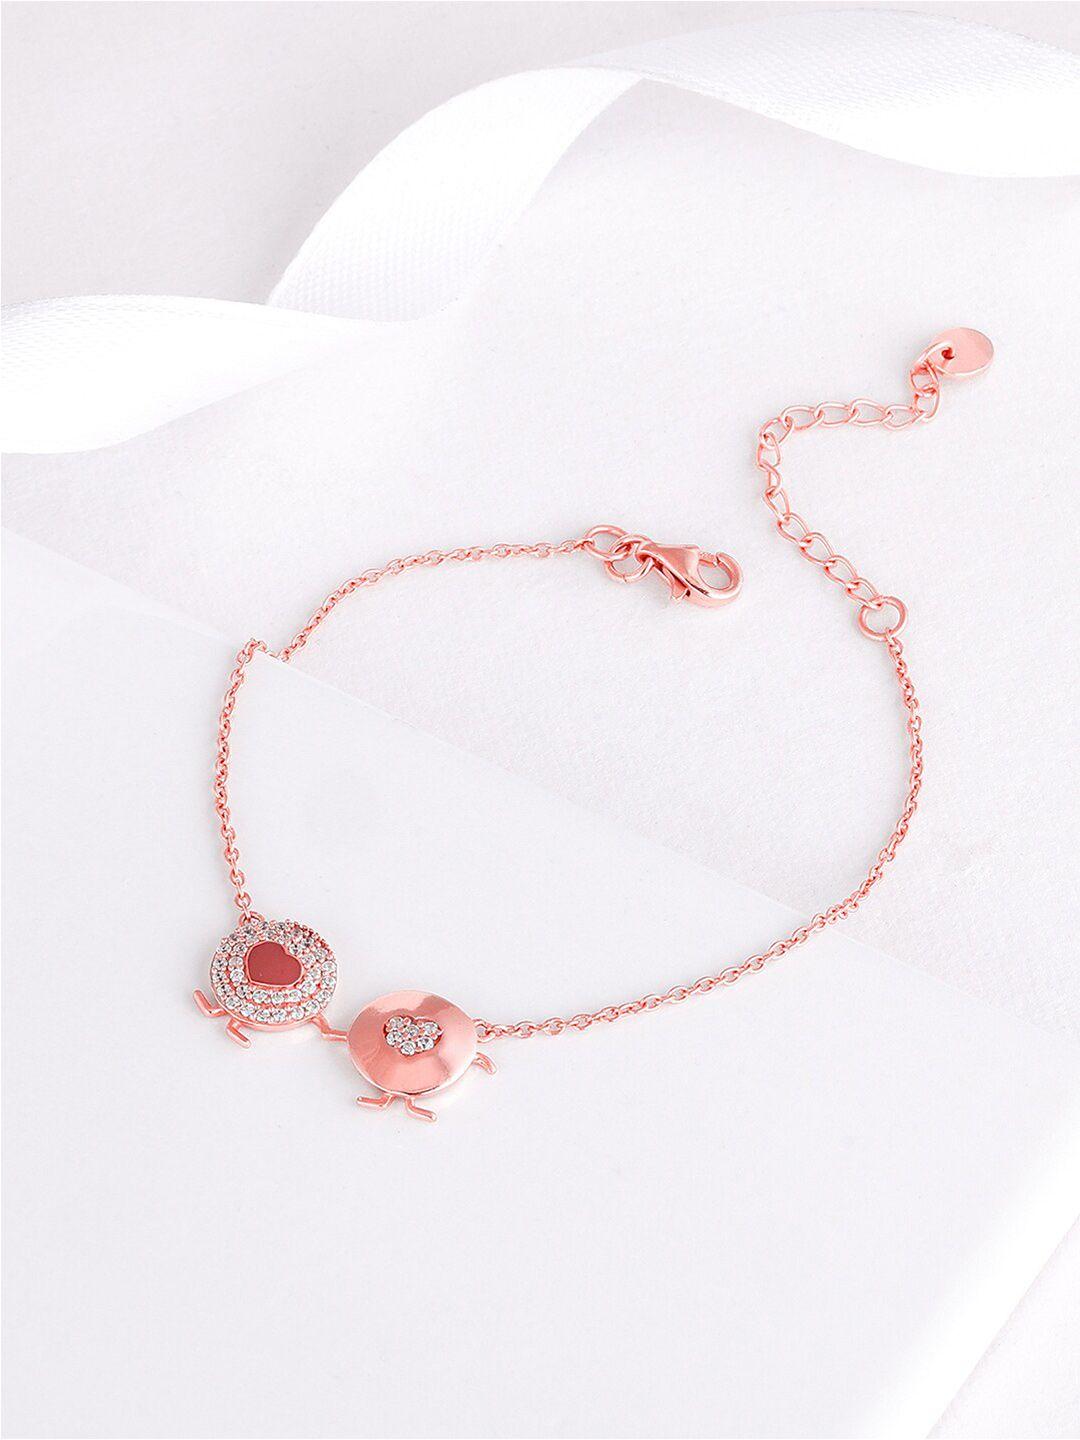 giva 925 sterling silver rose gold cubic zirconia rose gold-plated charm bracelet